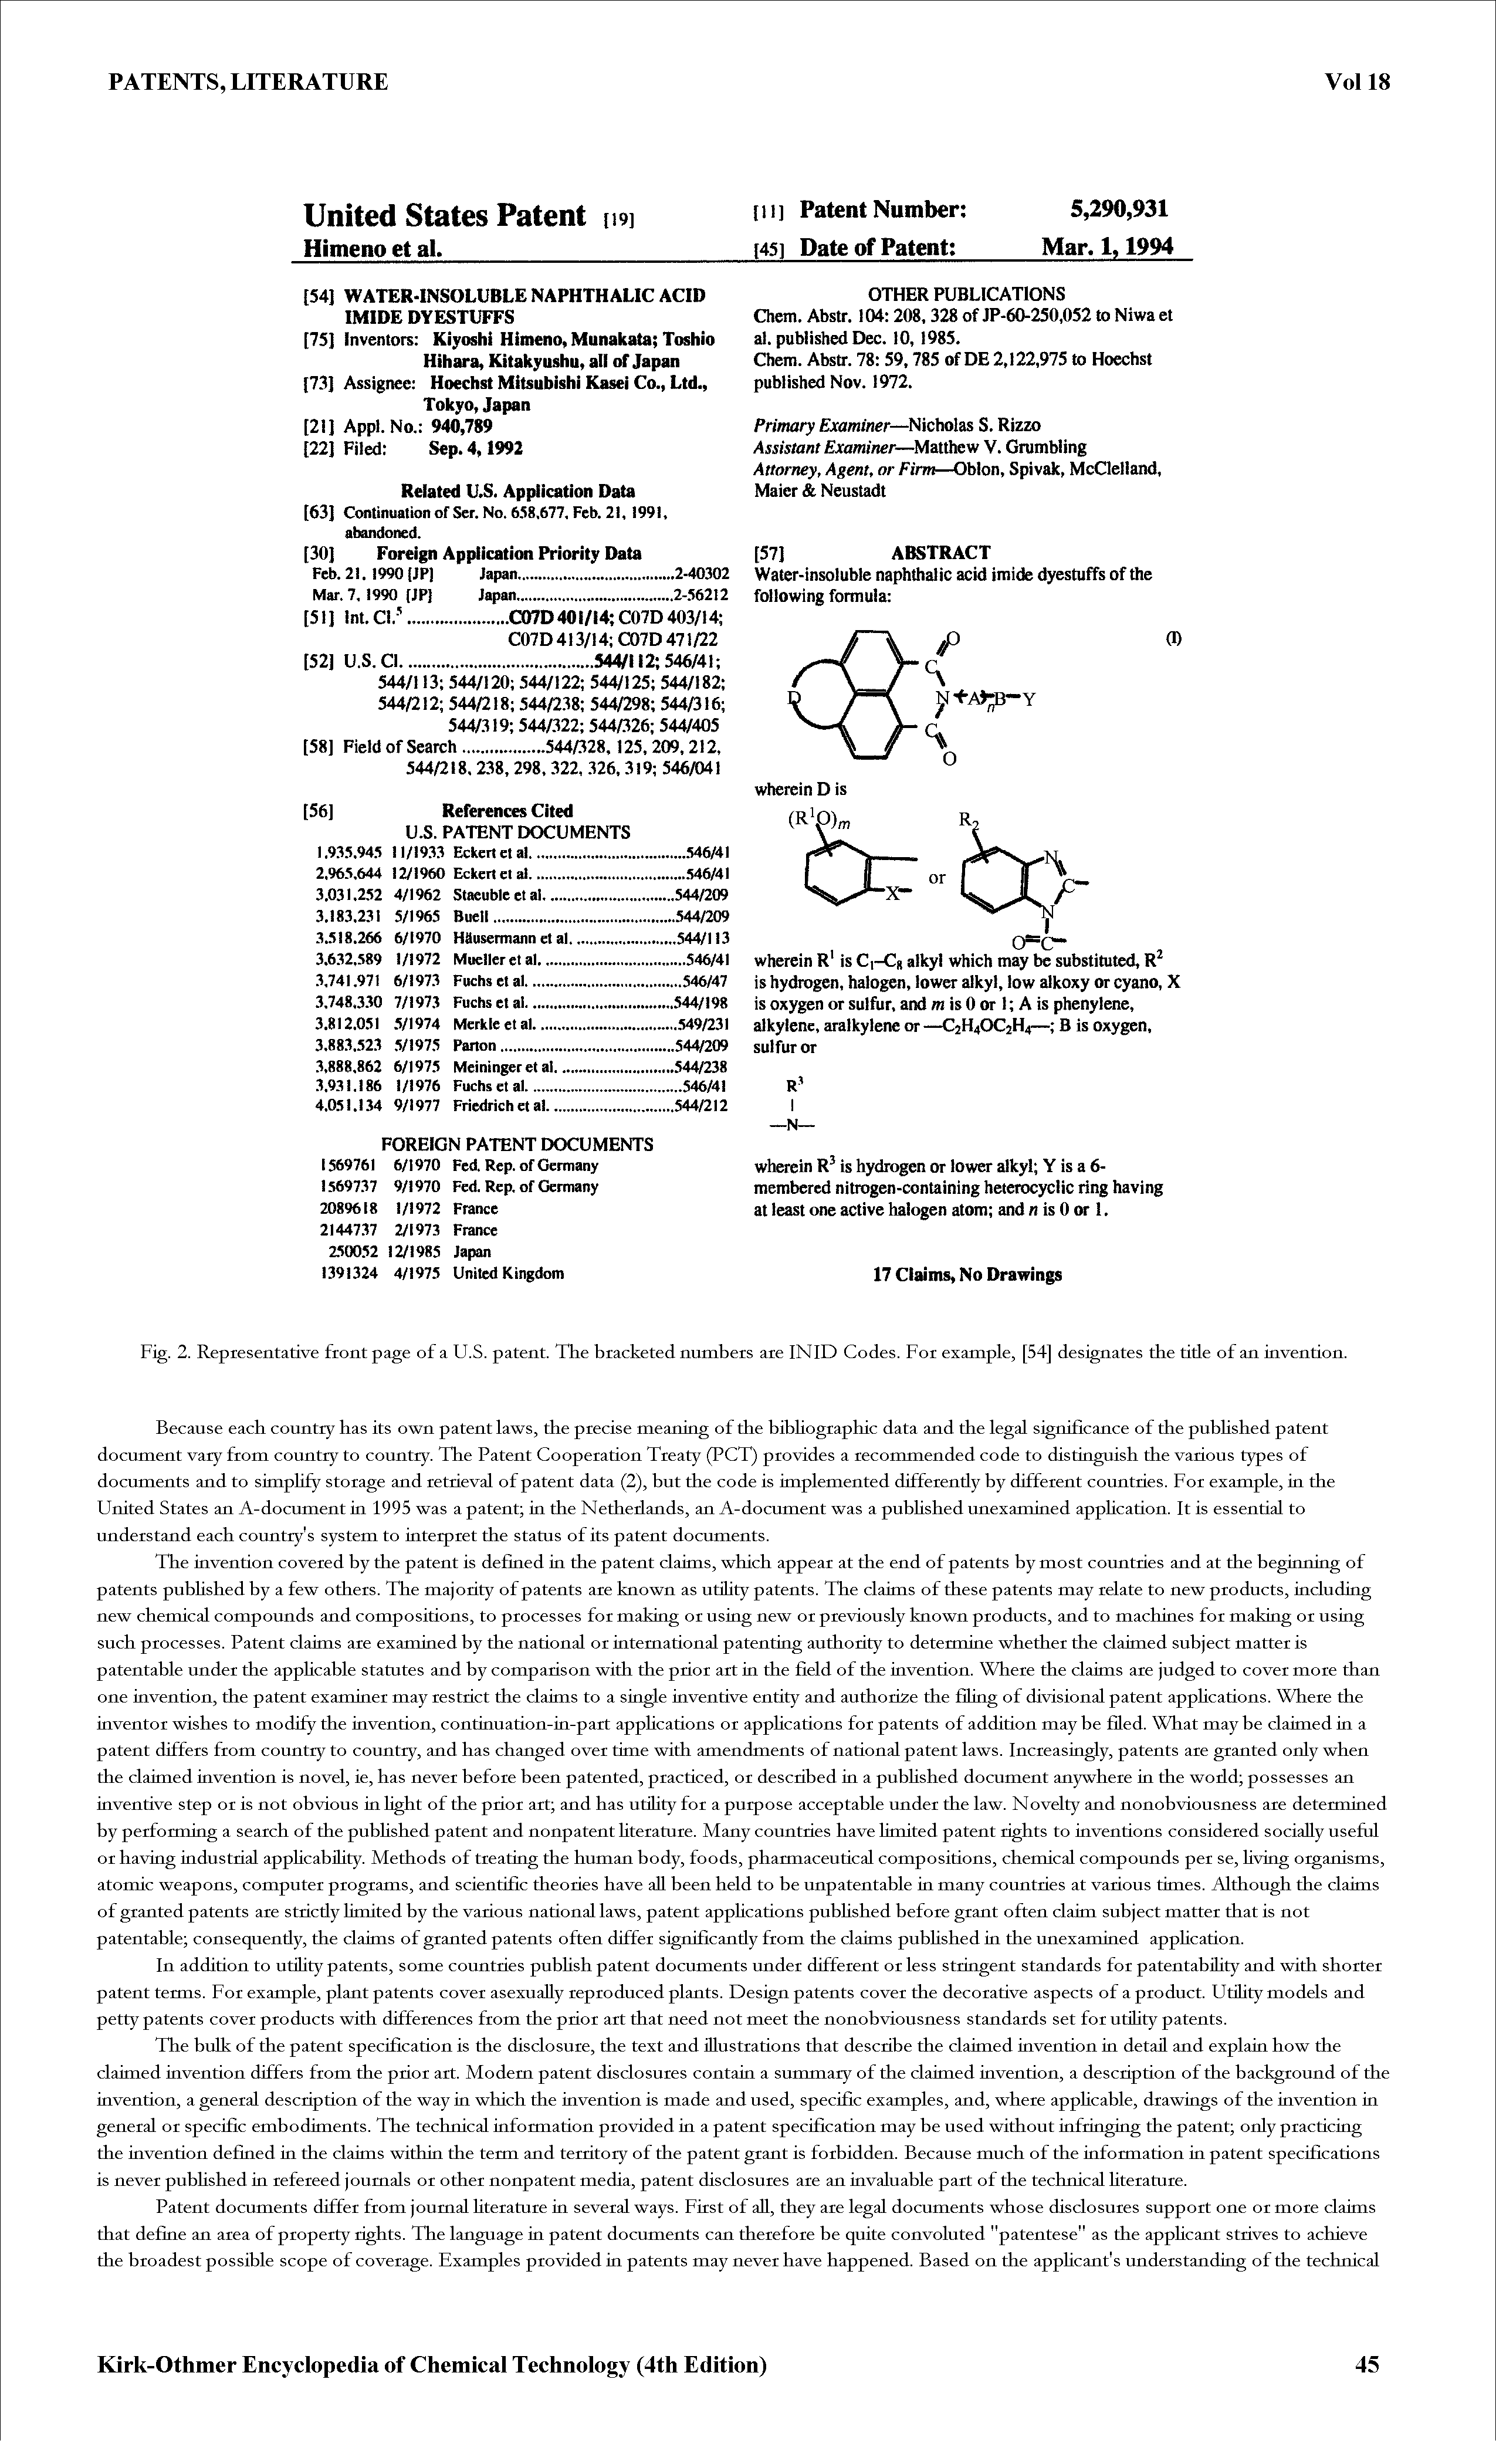 Fig. 2. Representative front page of a U.S. patent. The bracketed numbers are INID Codes. For example, [54] designates the tide of an invention.